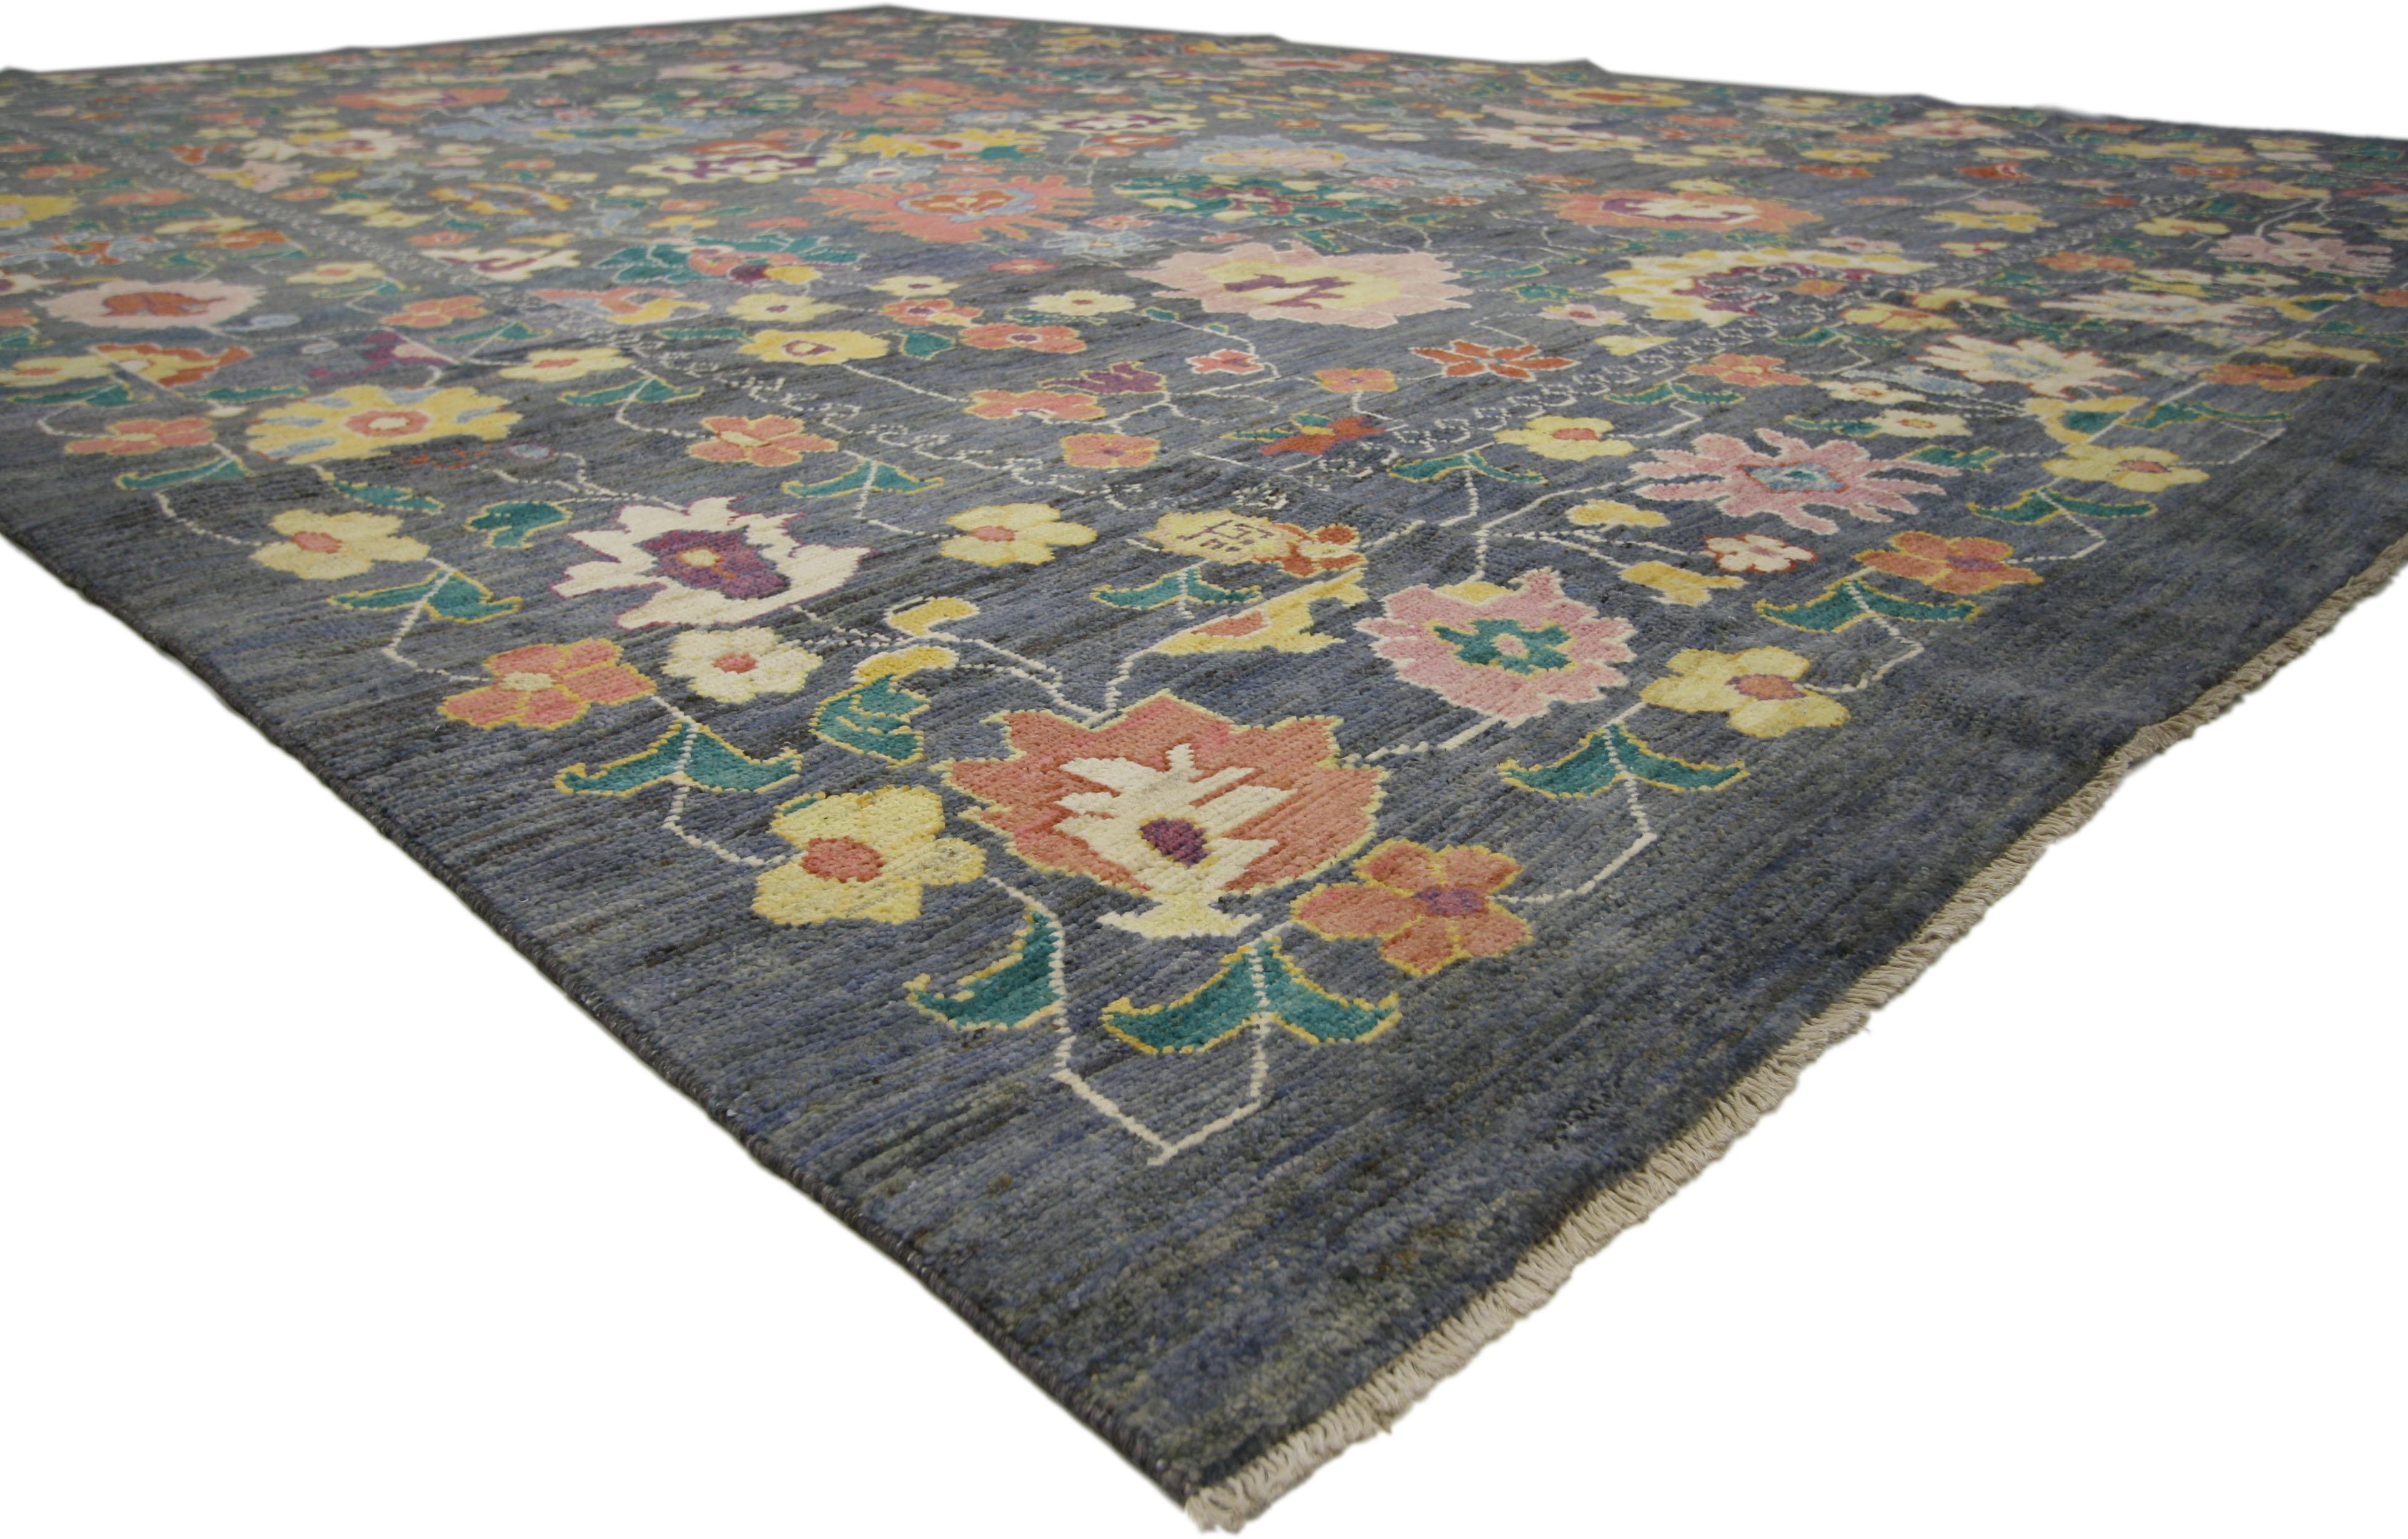 60656 New Colorful Turkish Oushak Rug with Modern Contemporary Style 11'10 x 17'00. Highly stylish yet tastefully casual, this is ideal for nearly any fashion-forward home. ​It features an all-over botanical trellis pattern composed of